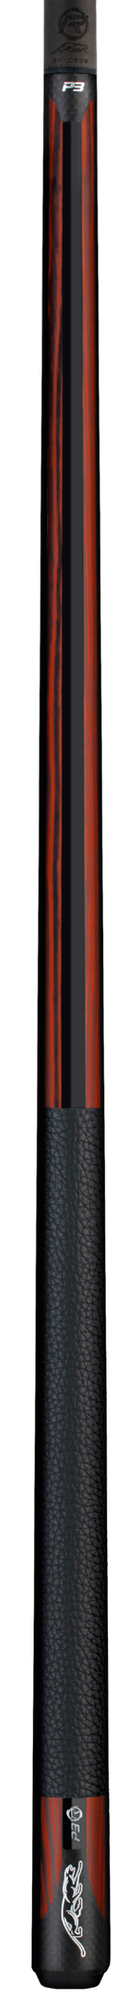 Predator Predator Limited P3 Red Tiger Pool Cue - Leather Luxe Wrap Pool Cue